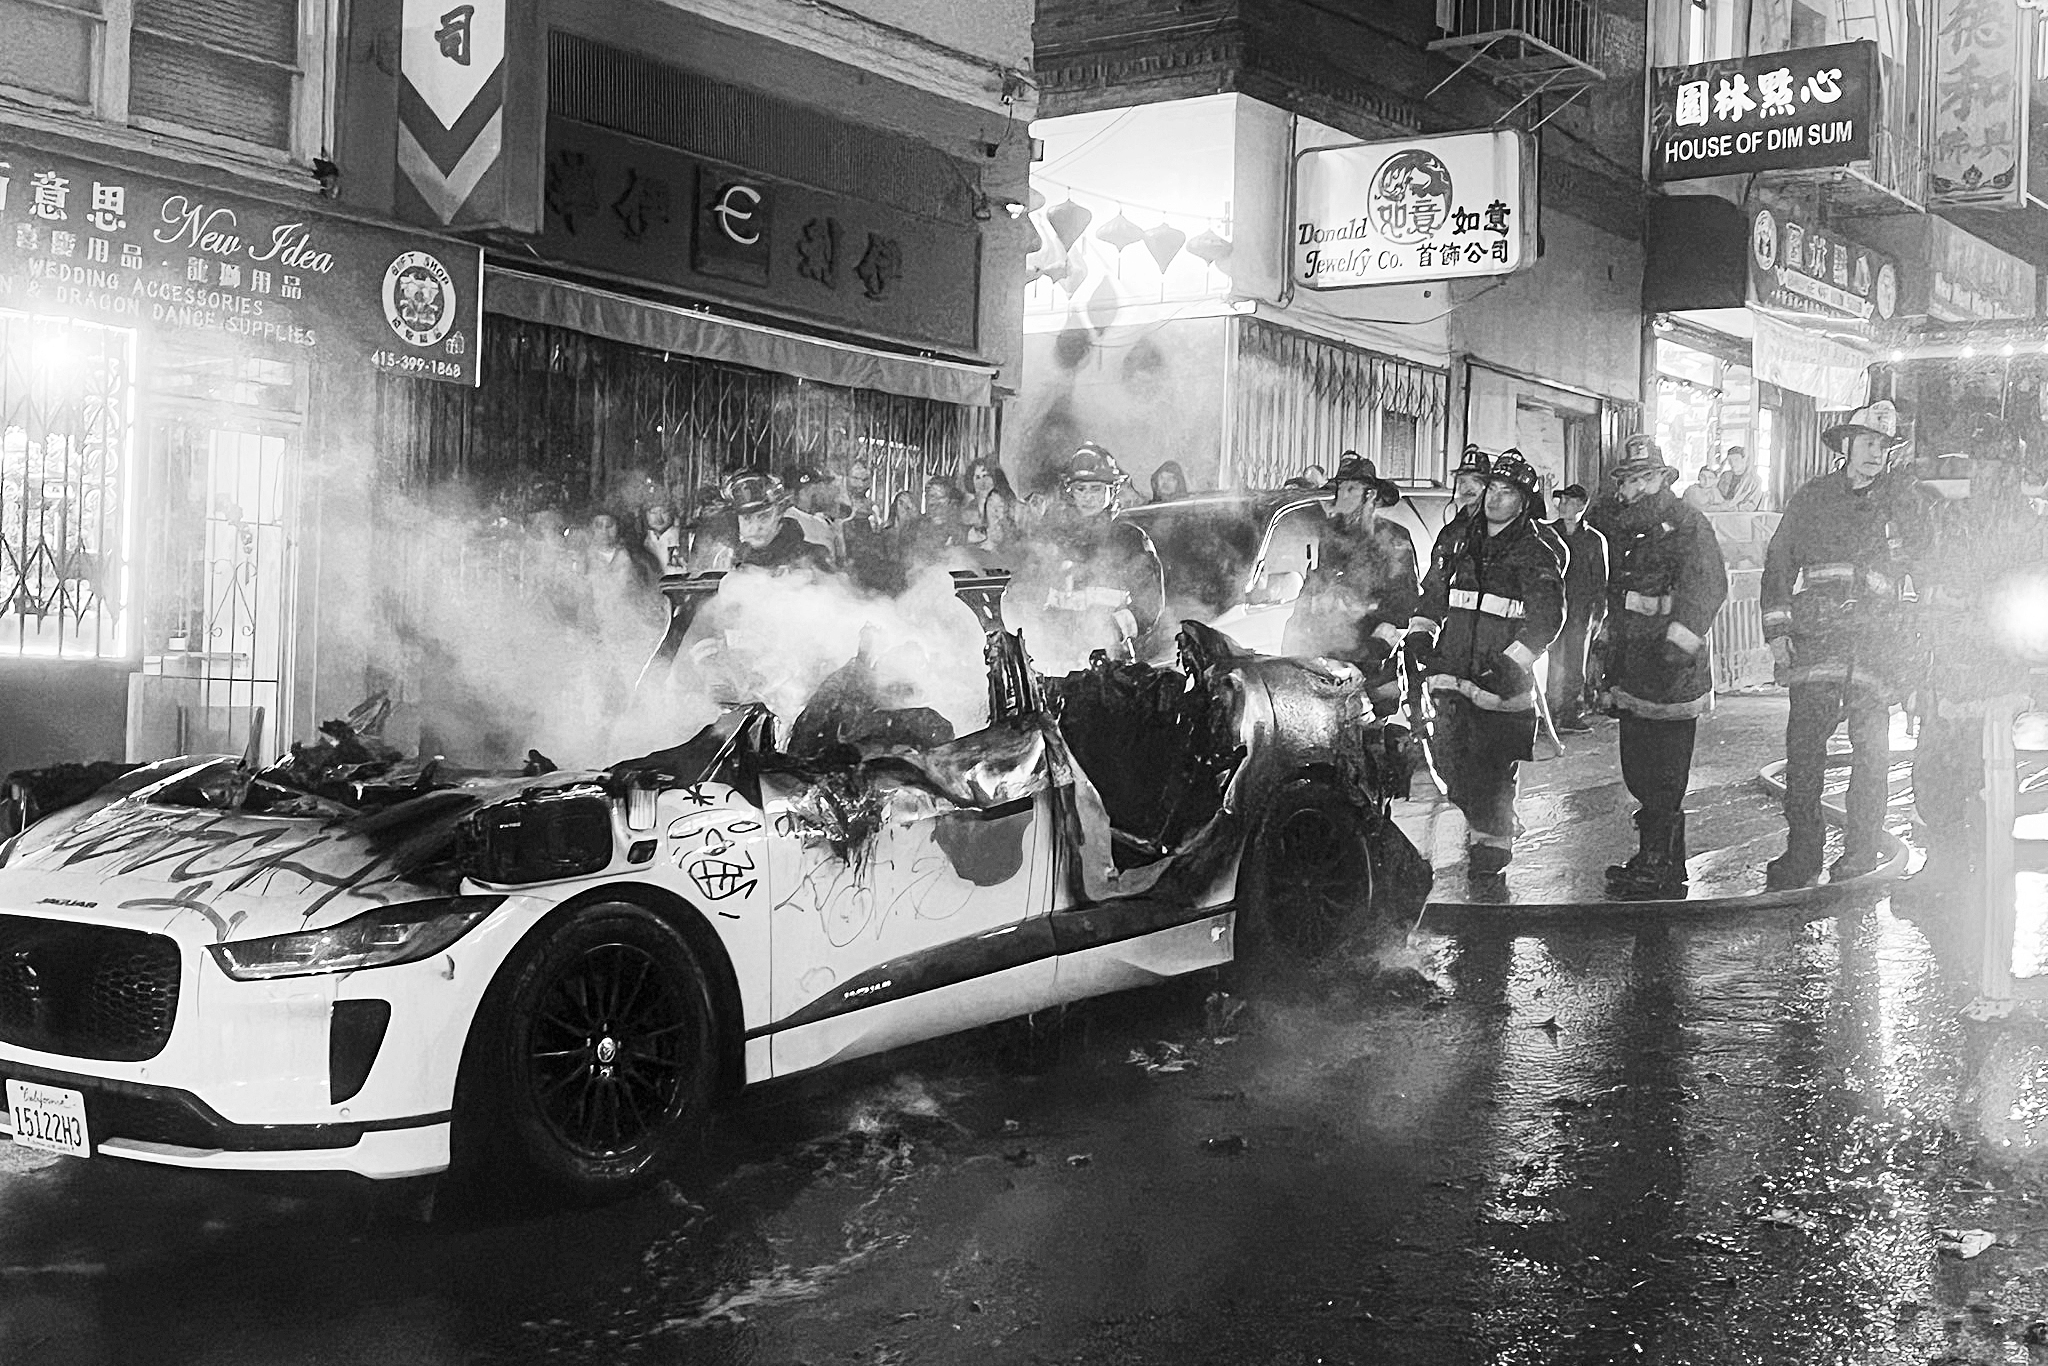 A black and white photo of a burned-out Waymo autonomous car surrounded by firefighters amidst steam on a city street at night.